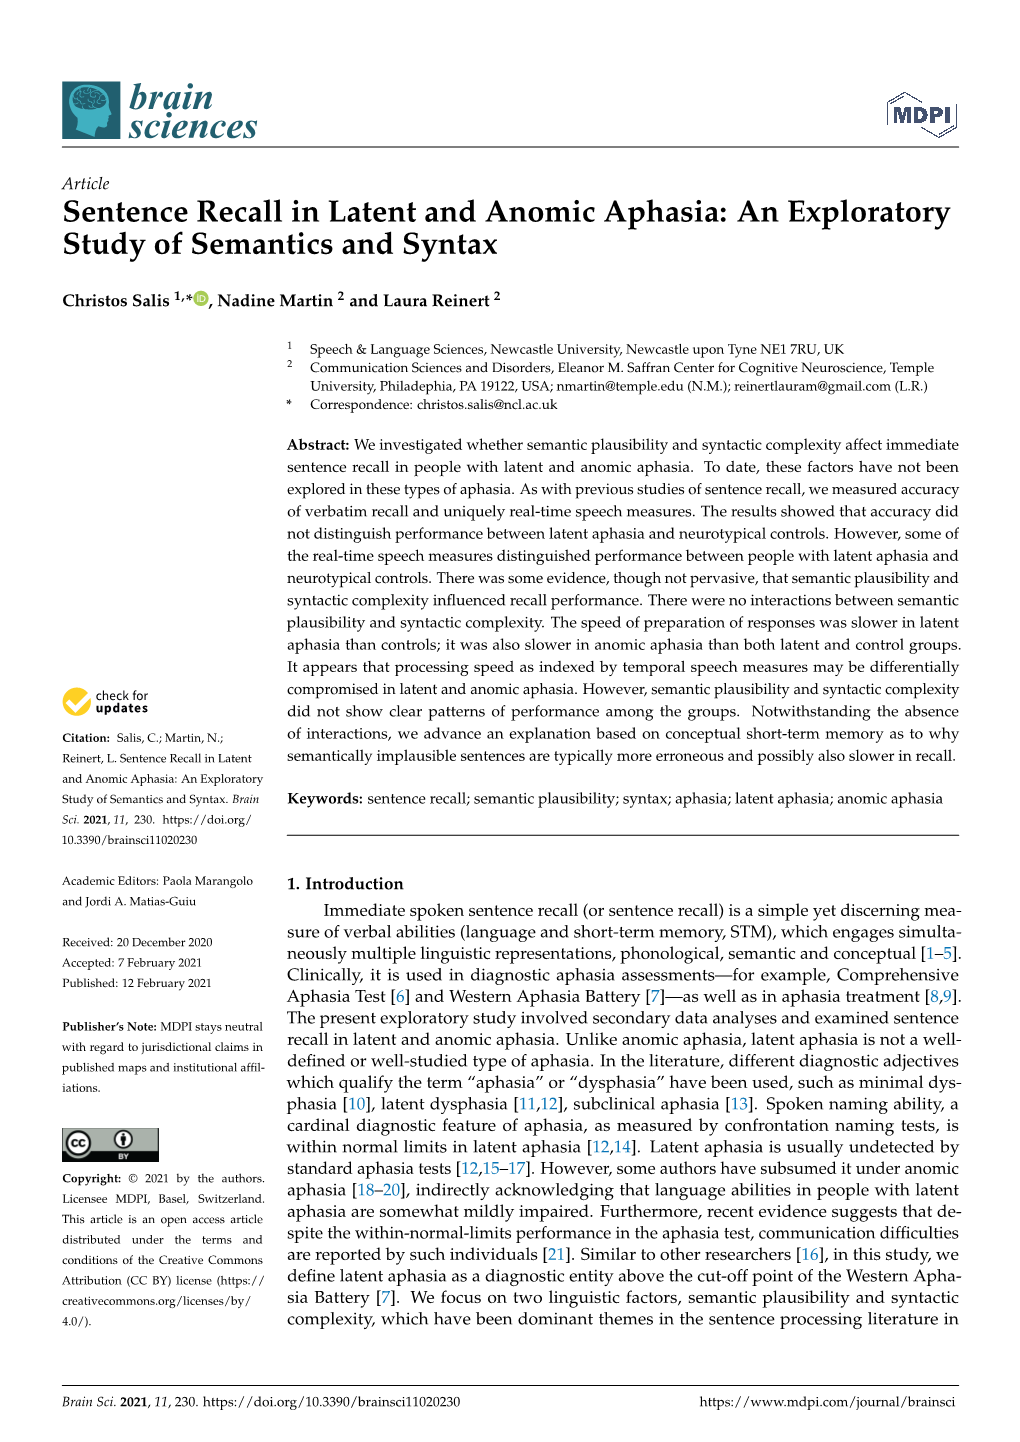 Sentence Recall in Latent and Anomic Aphasia: an Exploratory Study of Semantics and Syntax